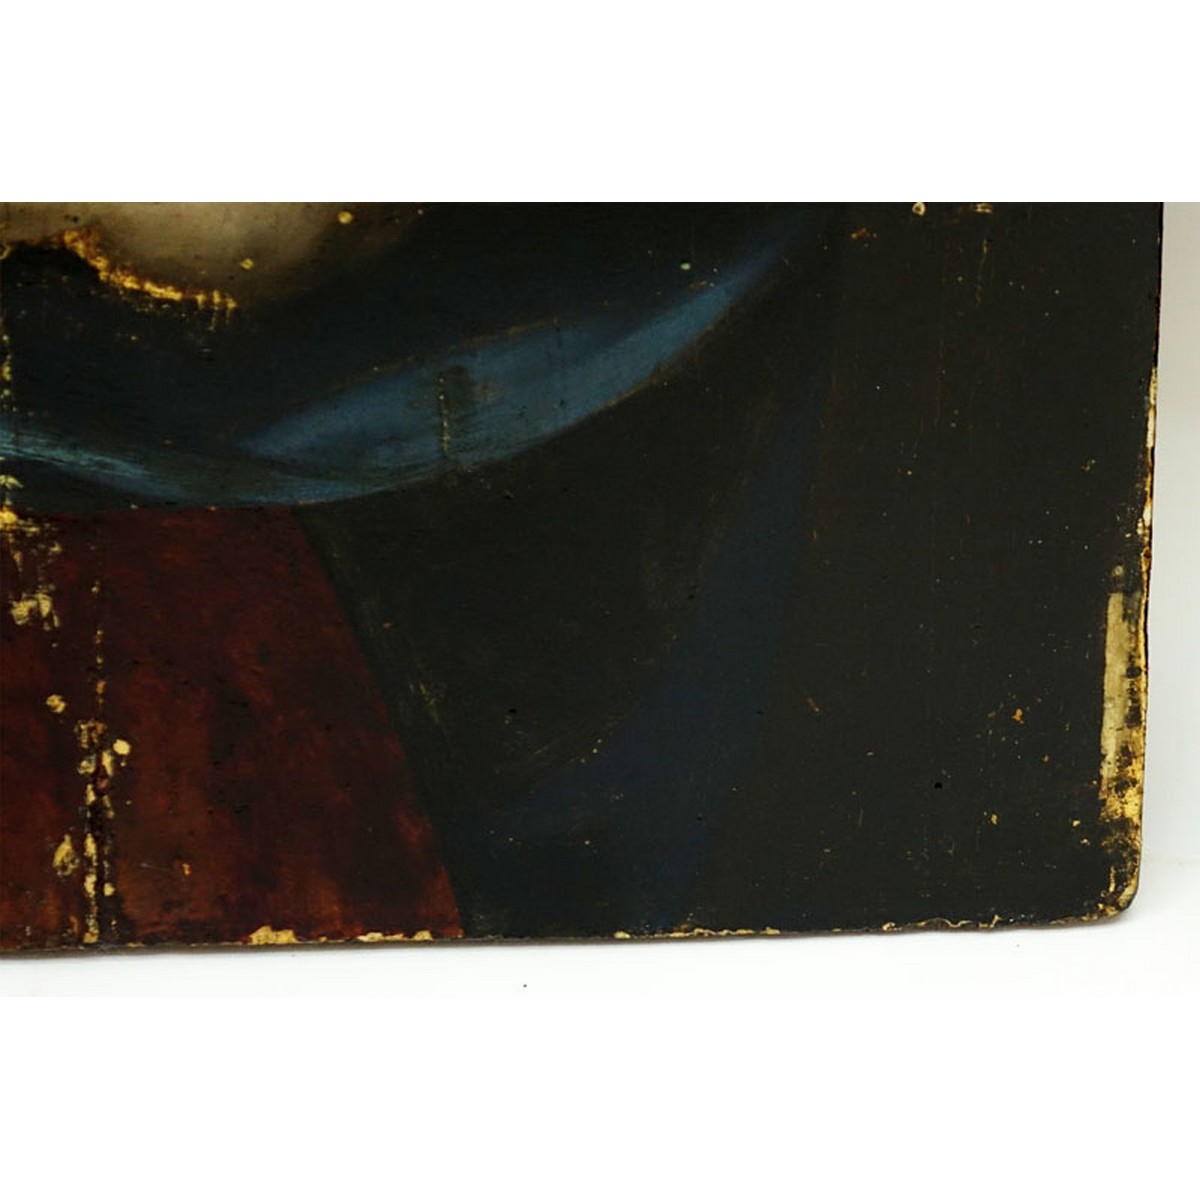 Large 16/17th Century Florentine School Oil on Panel, "Madonna and Child". Conserved condition, craquelure, varnish throughout, paint loss, hairline to center under the varnish.